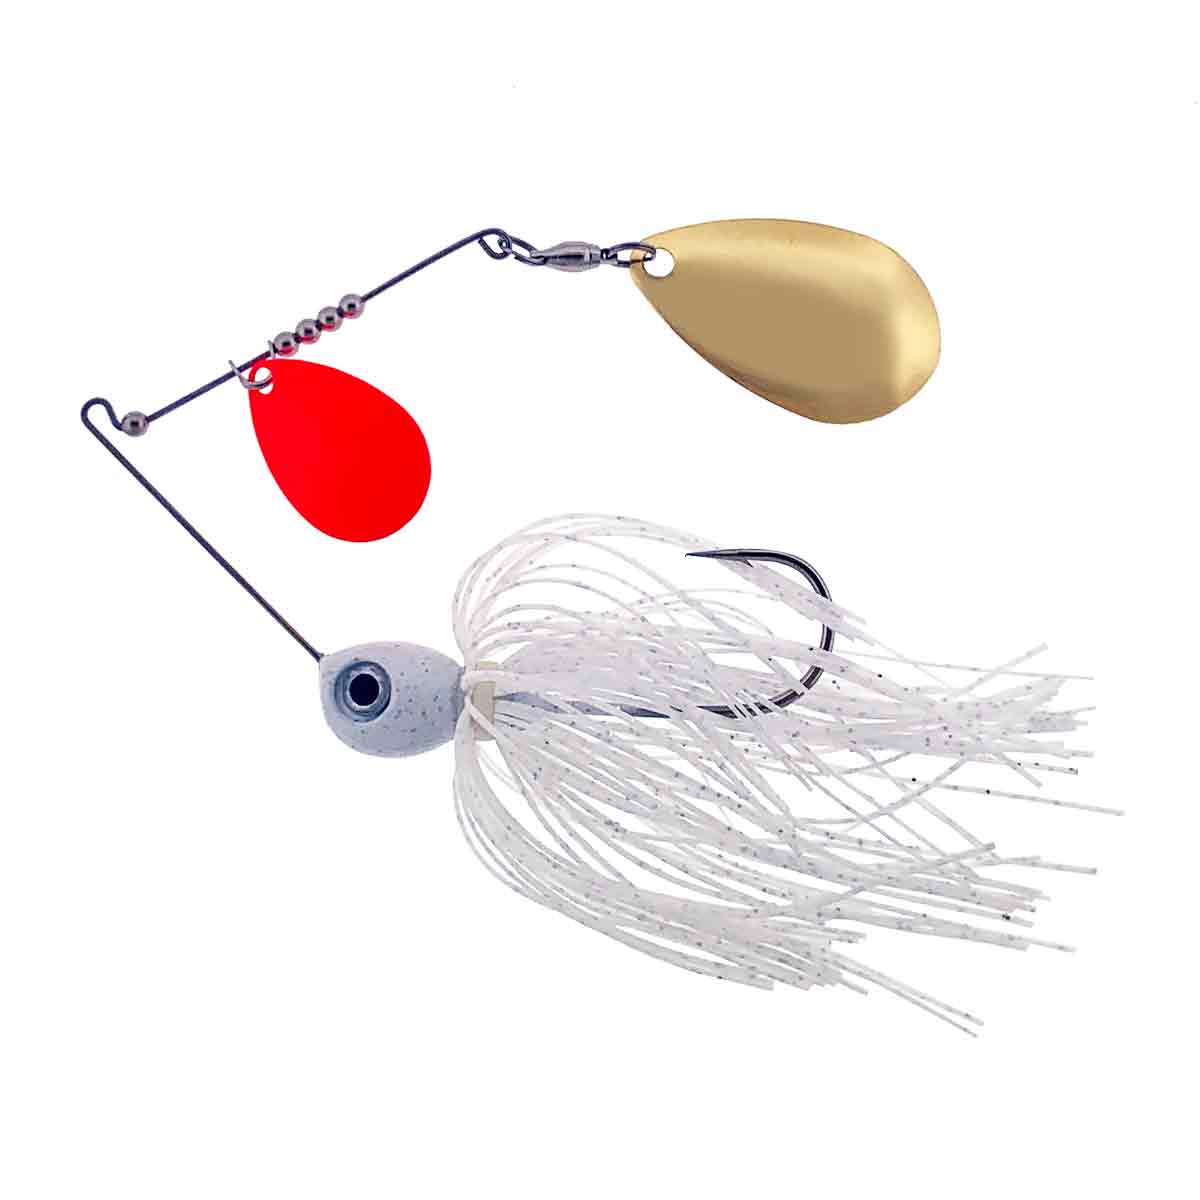 Mark Dove River Special Colorado/Indiana Spinnerbait _White Red/Gold